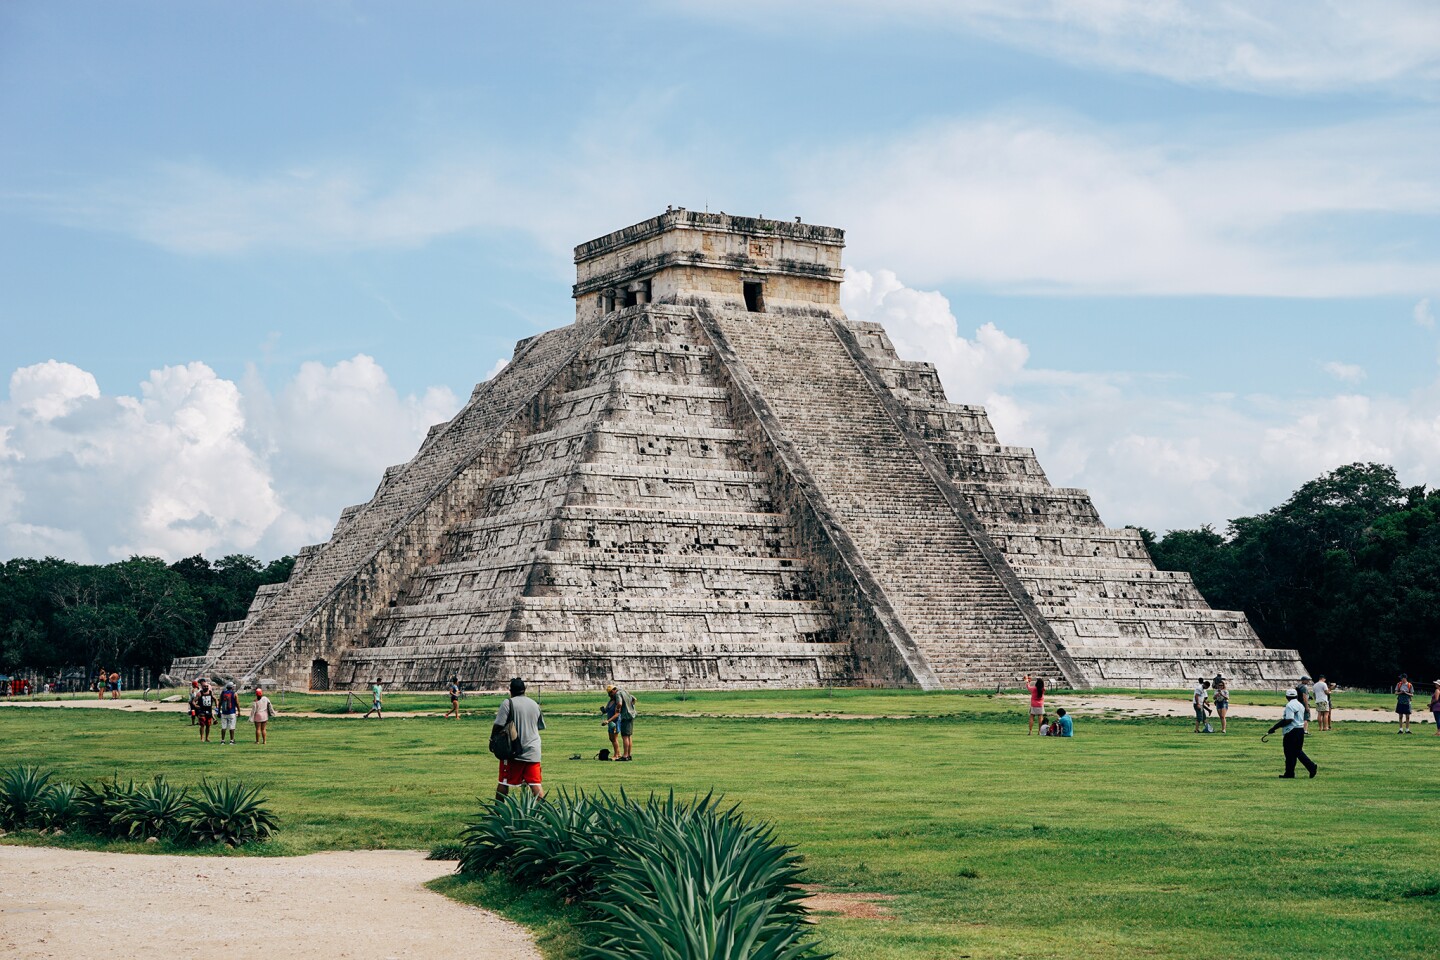 <h2>2. Chichén Itzá</h2> <p><i>Yucatán Peninsula, Mexico</i></p> <p><a class="Link" href="https://whc.unesco.org/en/list/483" rel="noopener">Chichén Itzá</a>, a complex of pre-Columbian ruins on Mexico’s Yucatán Peninsula, thrived as one of the largest Mayan cities from 400 C.E. to the 1400s. It’s thought to have had the most diverse population in the Mayan world due to the variety of Mesoamerican architectural styles on-site. Chichén Itzá’s most famous structures include the Great Ball Court, the Temple of the Warriors, and El Castillo (also known as the Temple of Kukulkan), <a class="Link" href="https://www.afar.com/magazine/the-top-10-pyramids-in-mexico" rel="noopener">a step pyramid</a> that towers over one of the most beautiful UNESCO World Heritage sites. </p>  <h3>How to visit</h3> <p>Chichén Itzá is a three-hour drive from Cancún and about 30 minutes from Valladolid. Tickets to Chichén Itzá can be purchased on-site. Entry costs approximately $36 for adults; entry for children 12 and under is free. The 16th-century colonial city has a baroque cathedral and a variety of accommodation options, from hotels with cenotes to the <a class="Link" href="https://www.afar.com/places/coqui-coqui" rel="noopener">Coqui Coqui</a> guesthouse and perfumery.</p>